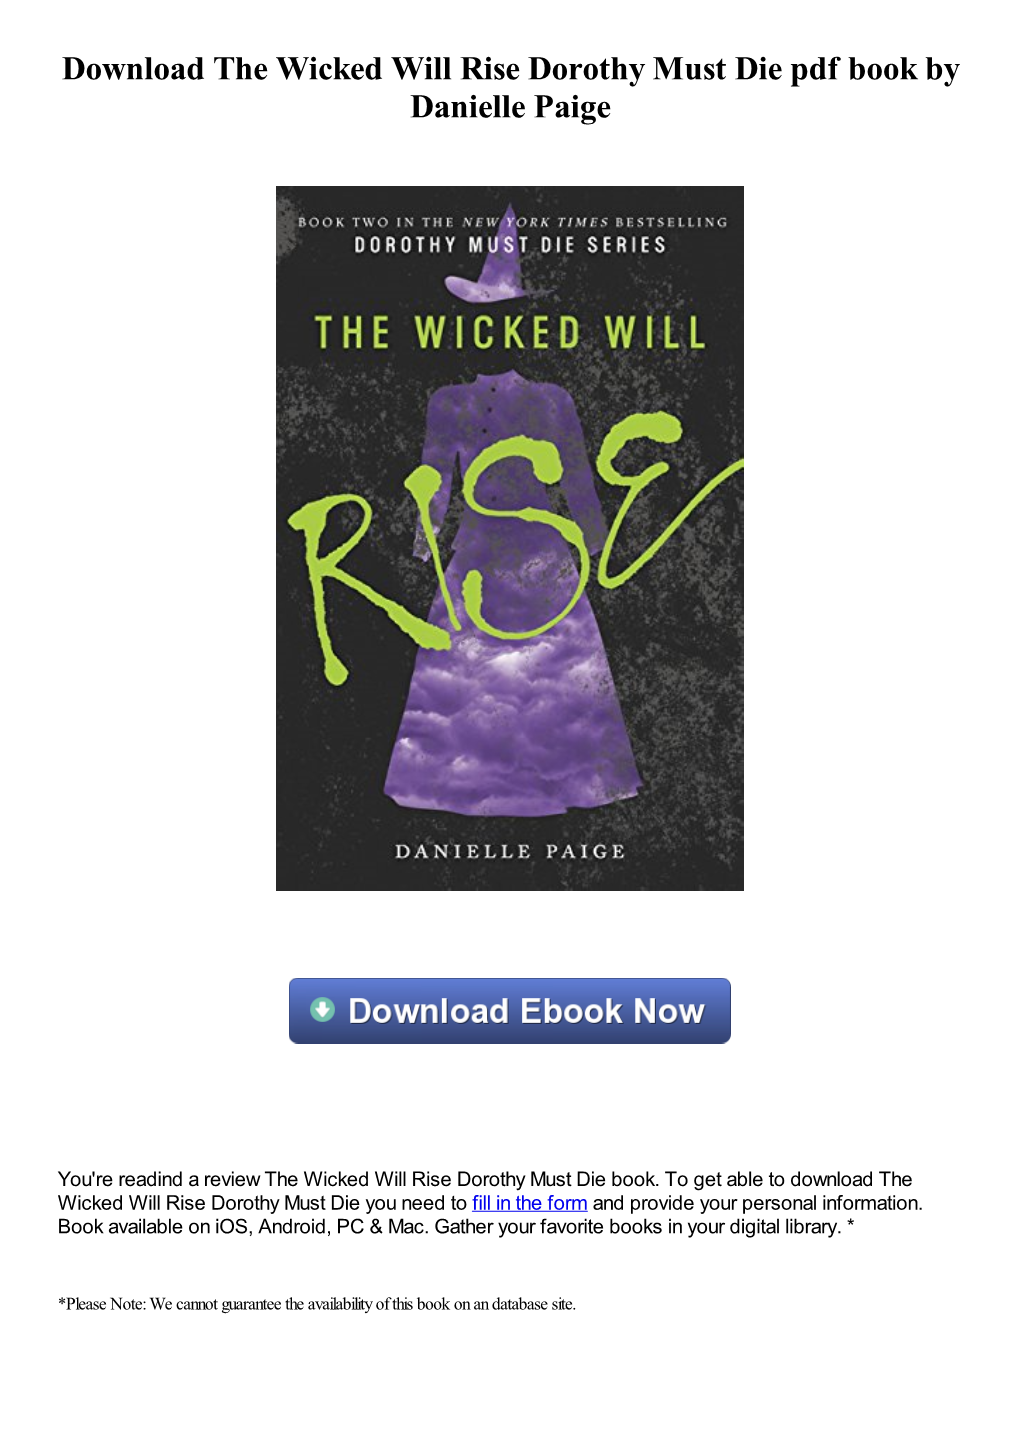 Download the Wicked Will Rise Dorothy Must Die Pdf Ebook By